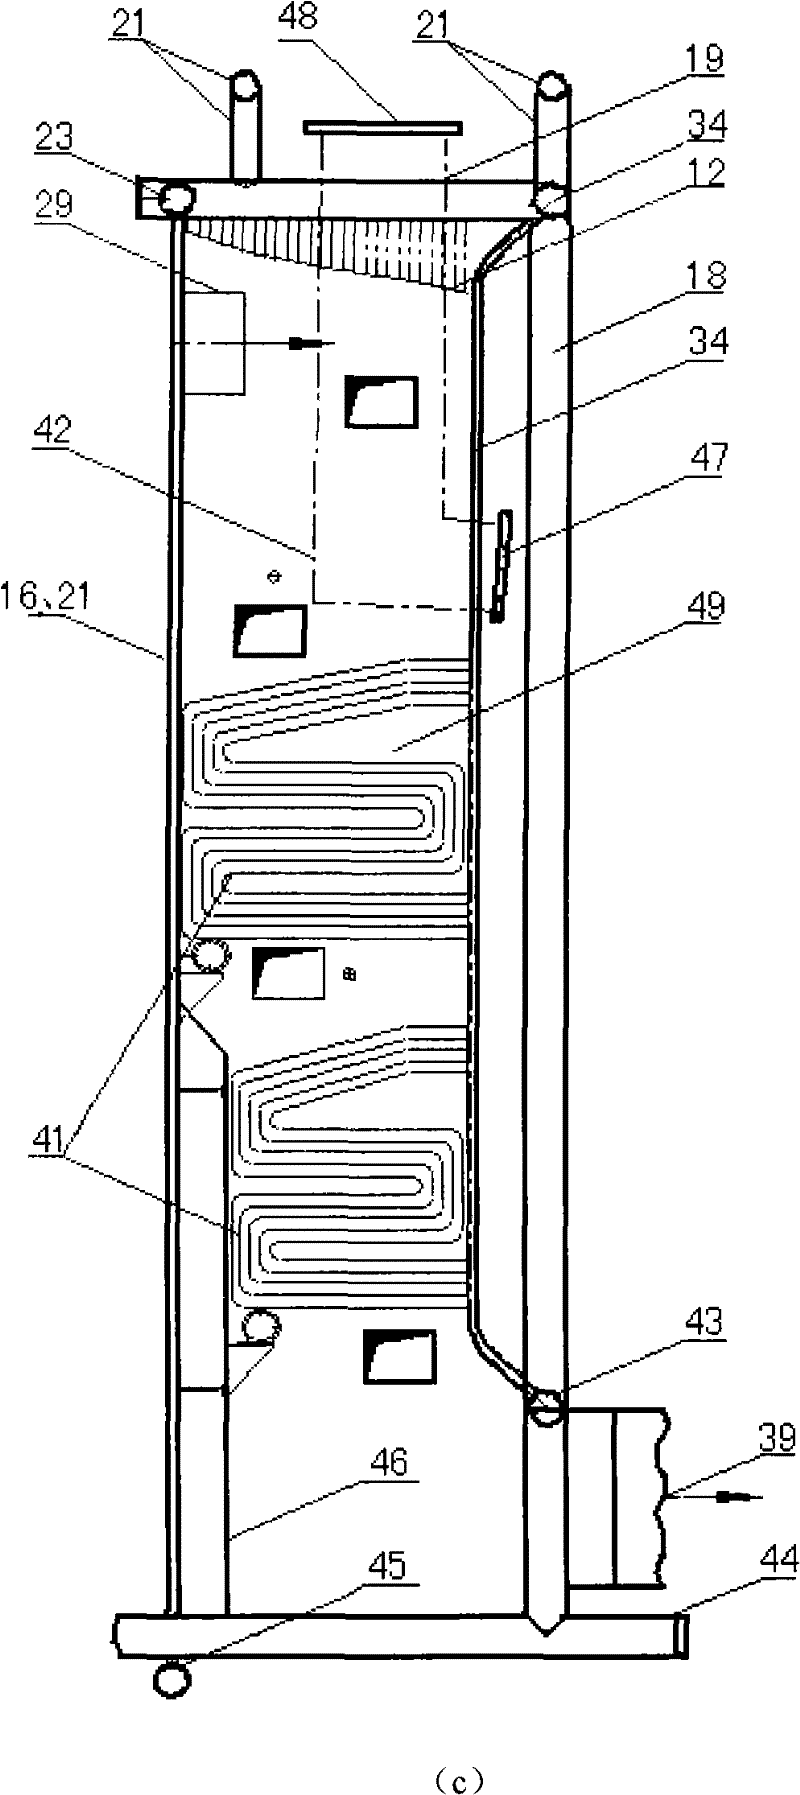 Full-membrane wall circulating fluidized bed boiler without corridor corner tube